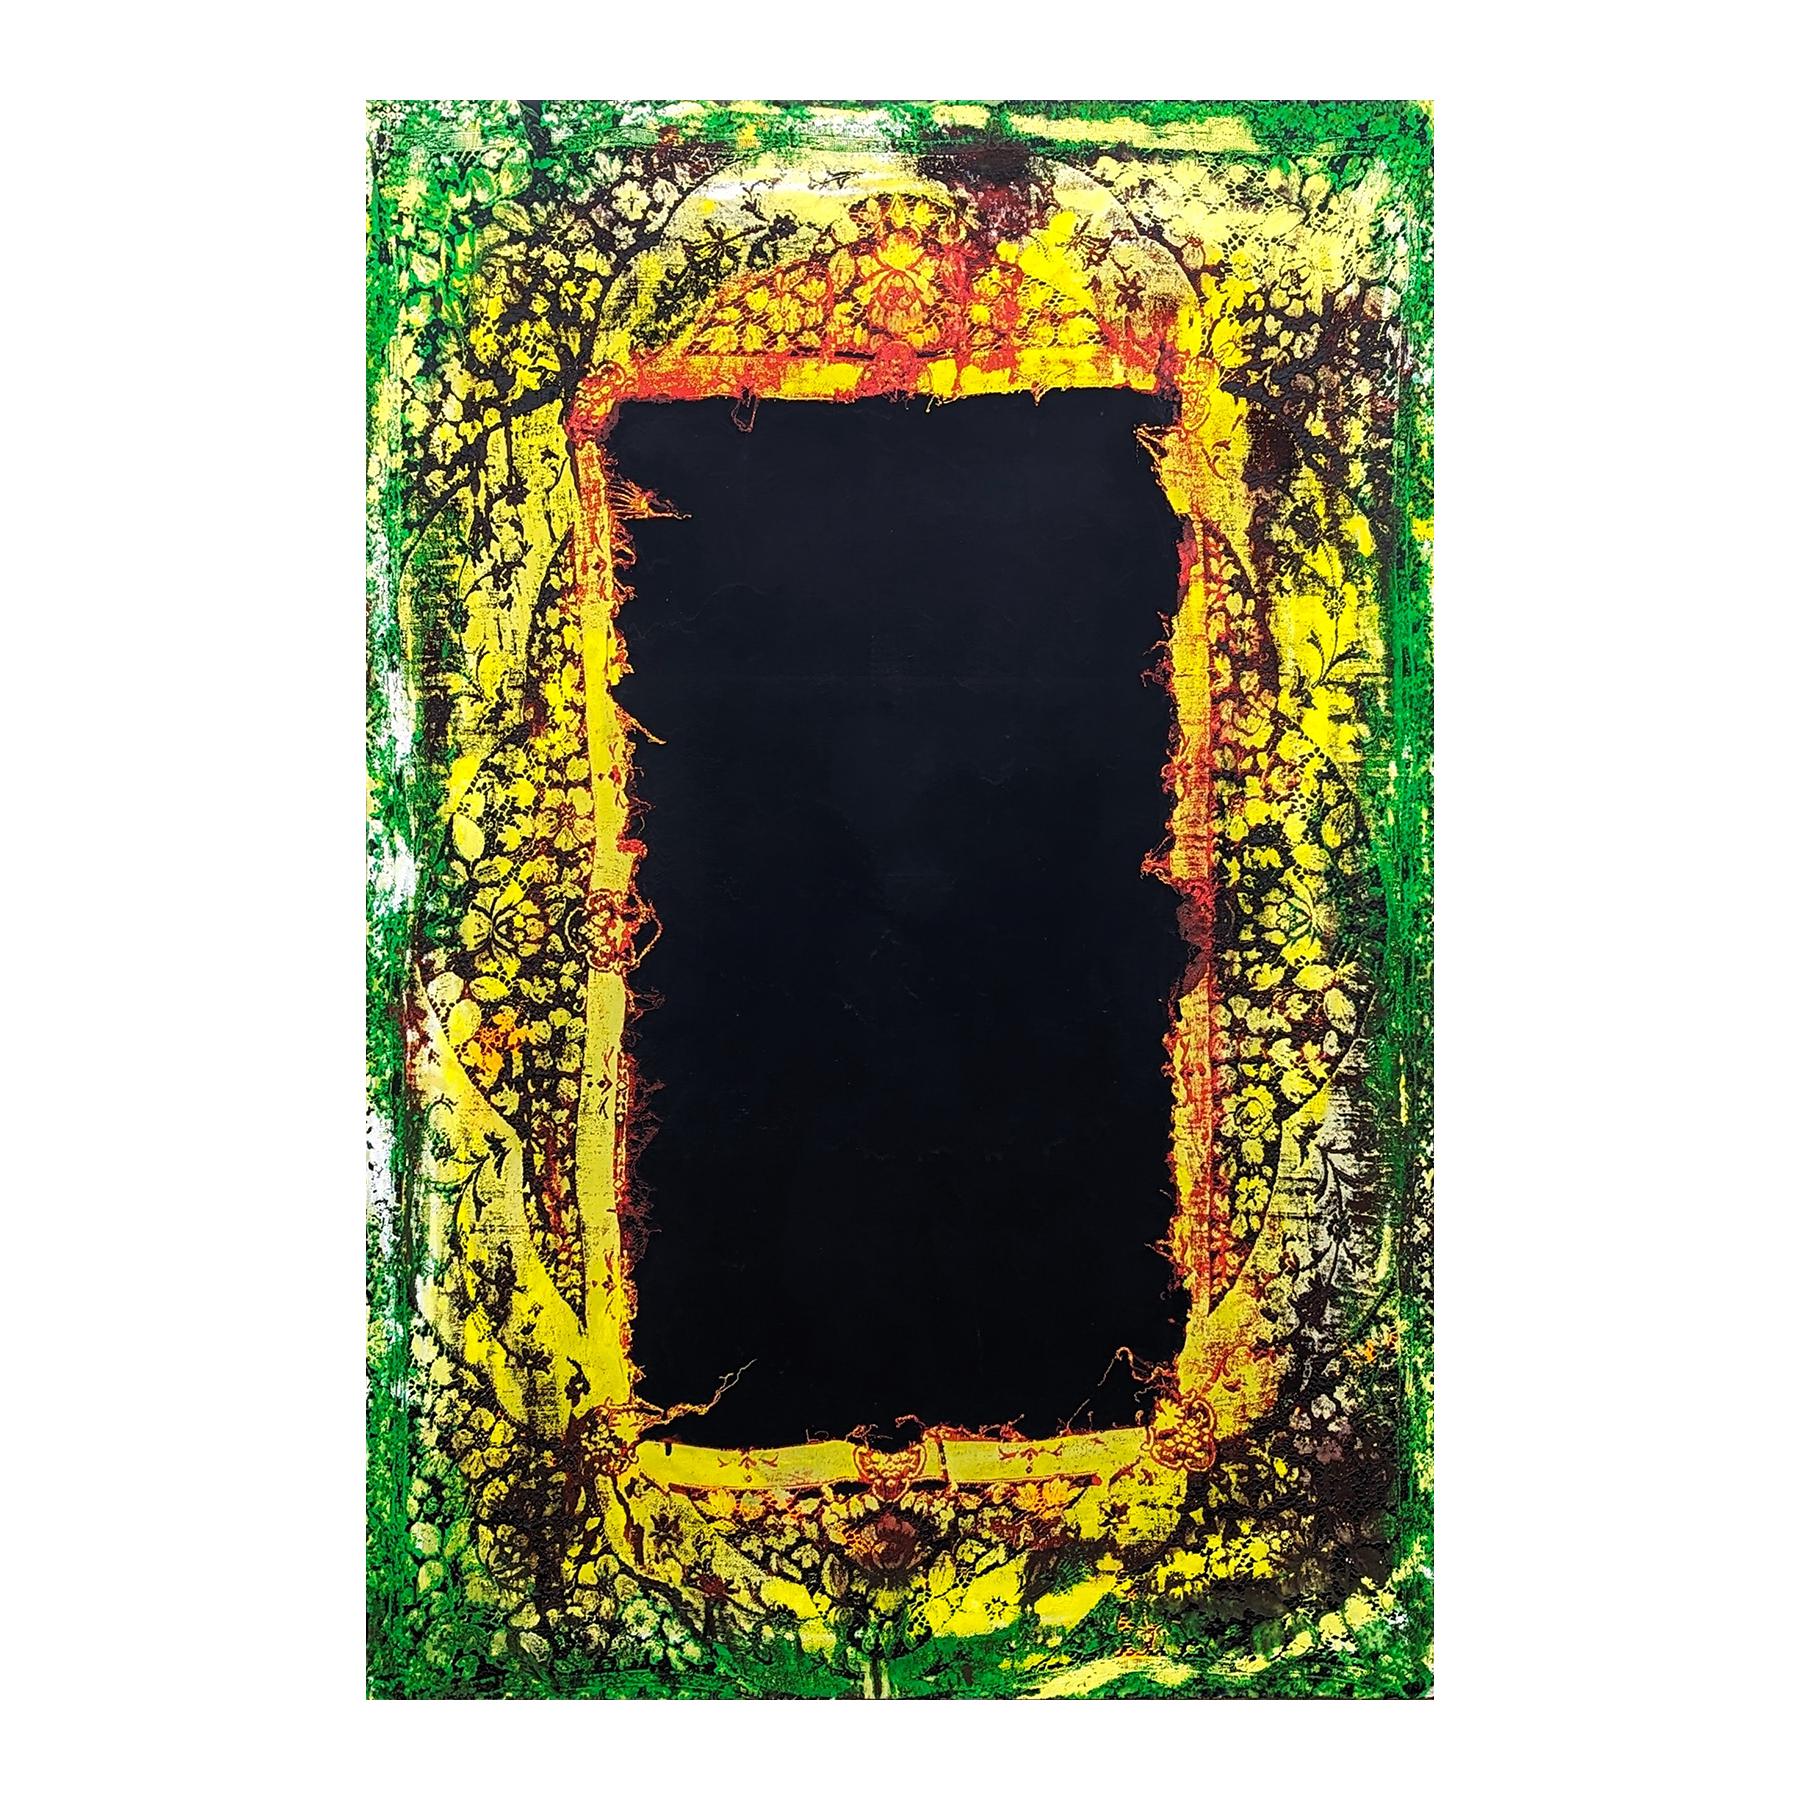 Contemporary green, yellow, and black acrylic painting that utilizes a unique lace texture to create a landscape by Houston artist Mark Flood. Originally a background element in Flood's pieces, lace eventually evolved into a main motif in his body